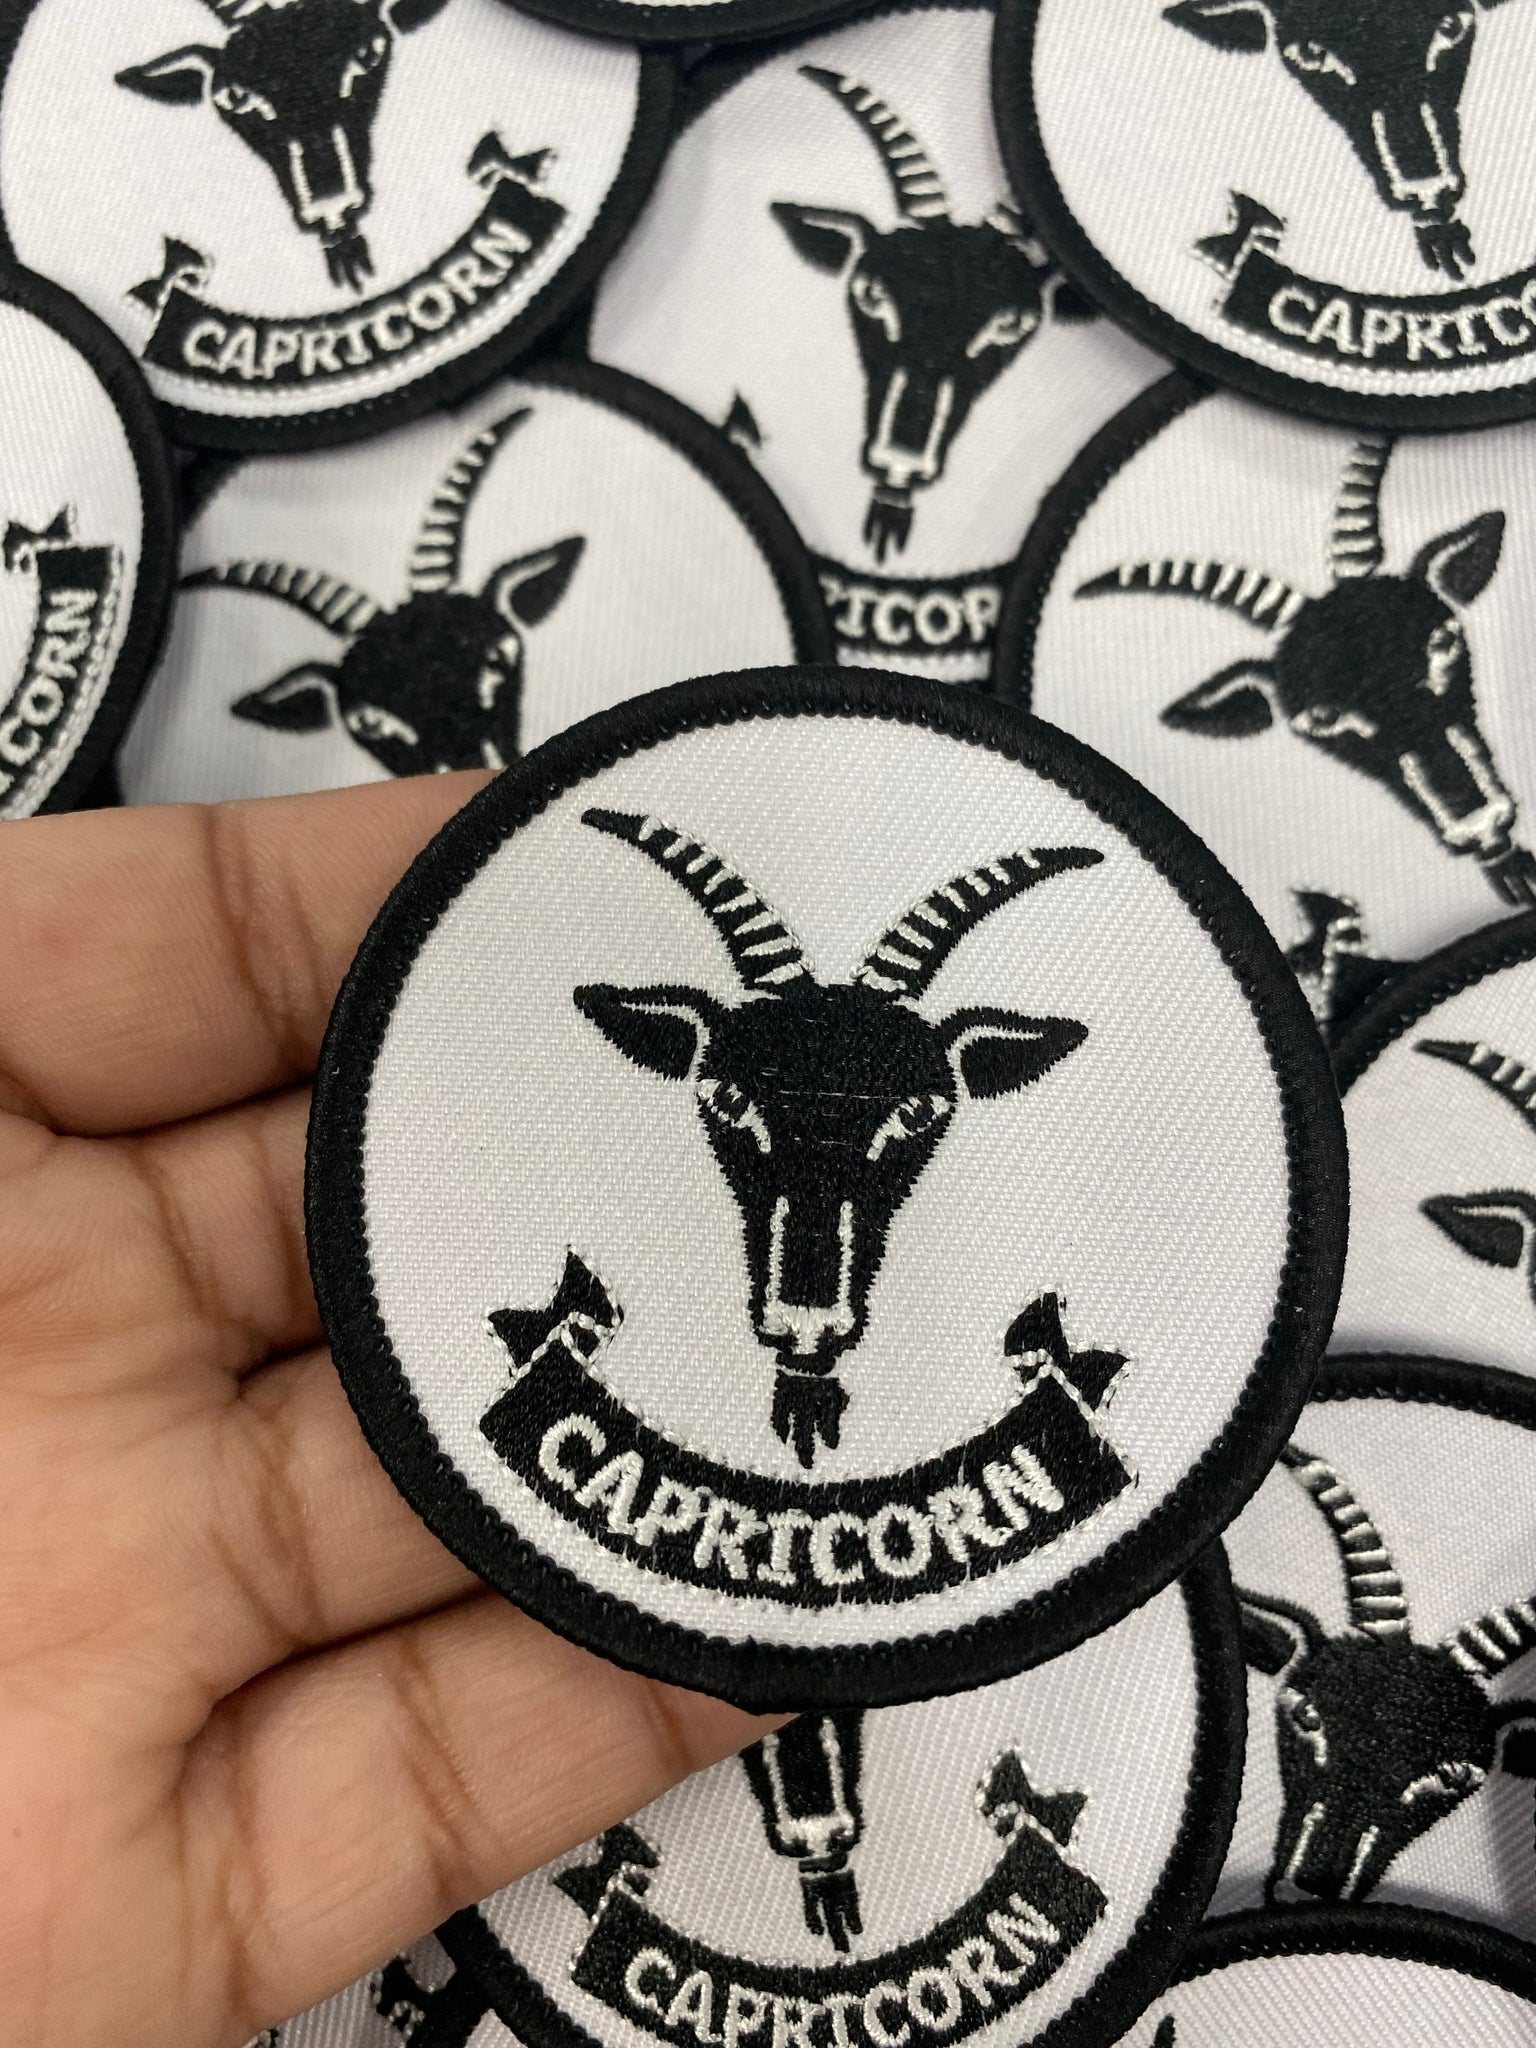 NEW, Fun, Vintage "Capricorn" Astrology iron-on Patch, 1 Pc., 3 inch, Embroidered Zodiac Signs